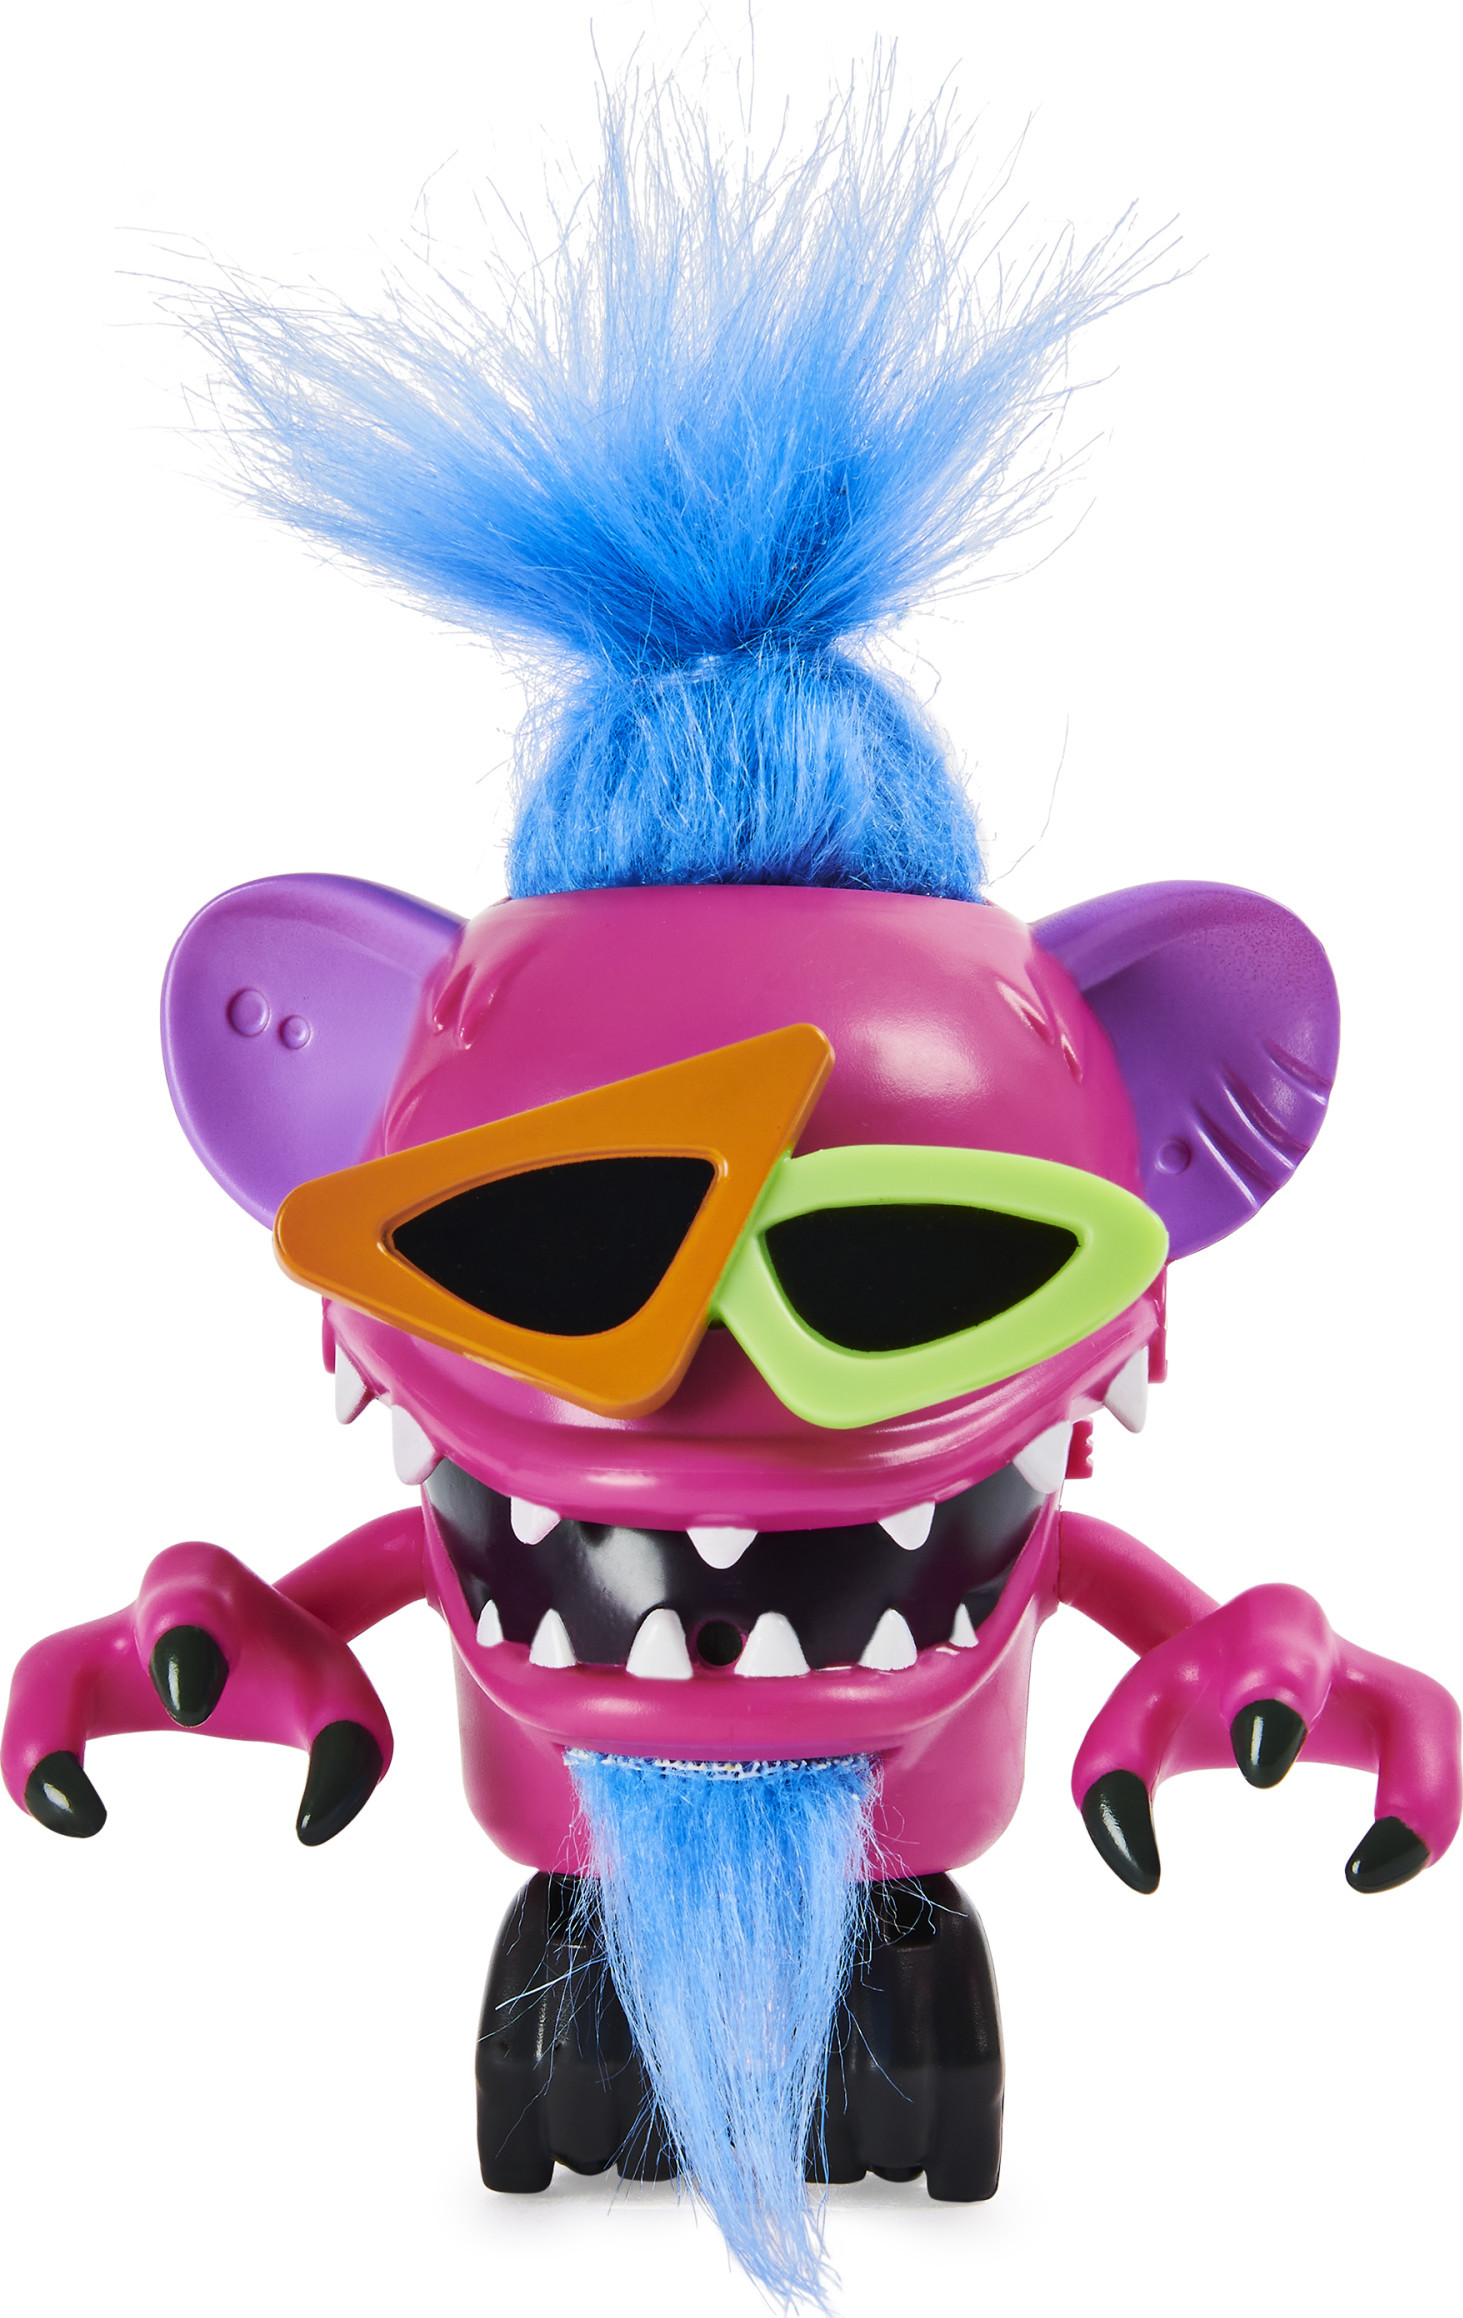 Scritterz, Bonoboz Interactive Collectible Jungle Creature Toy with Sounds and Movement, for Kids Aged 5 and up - image 1 of 8